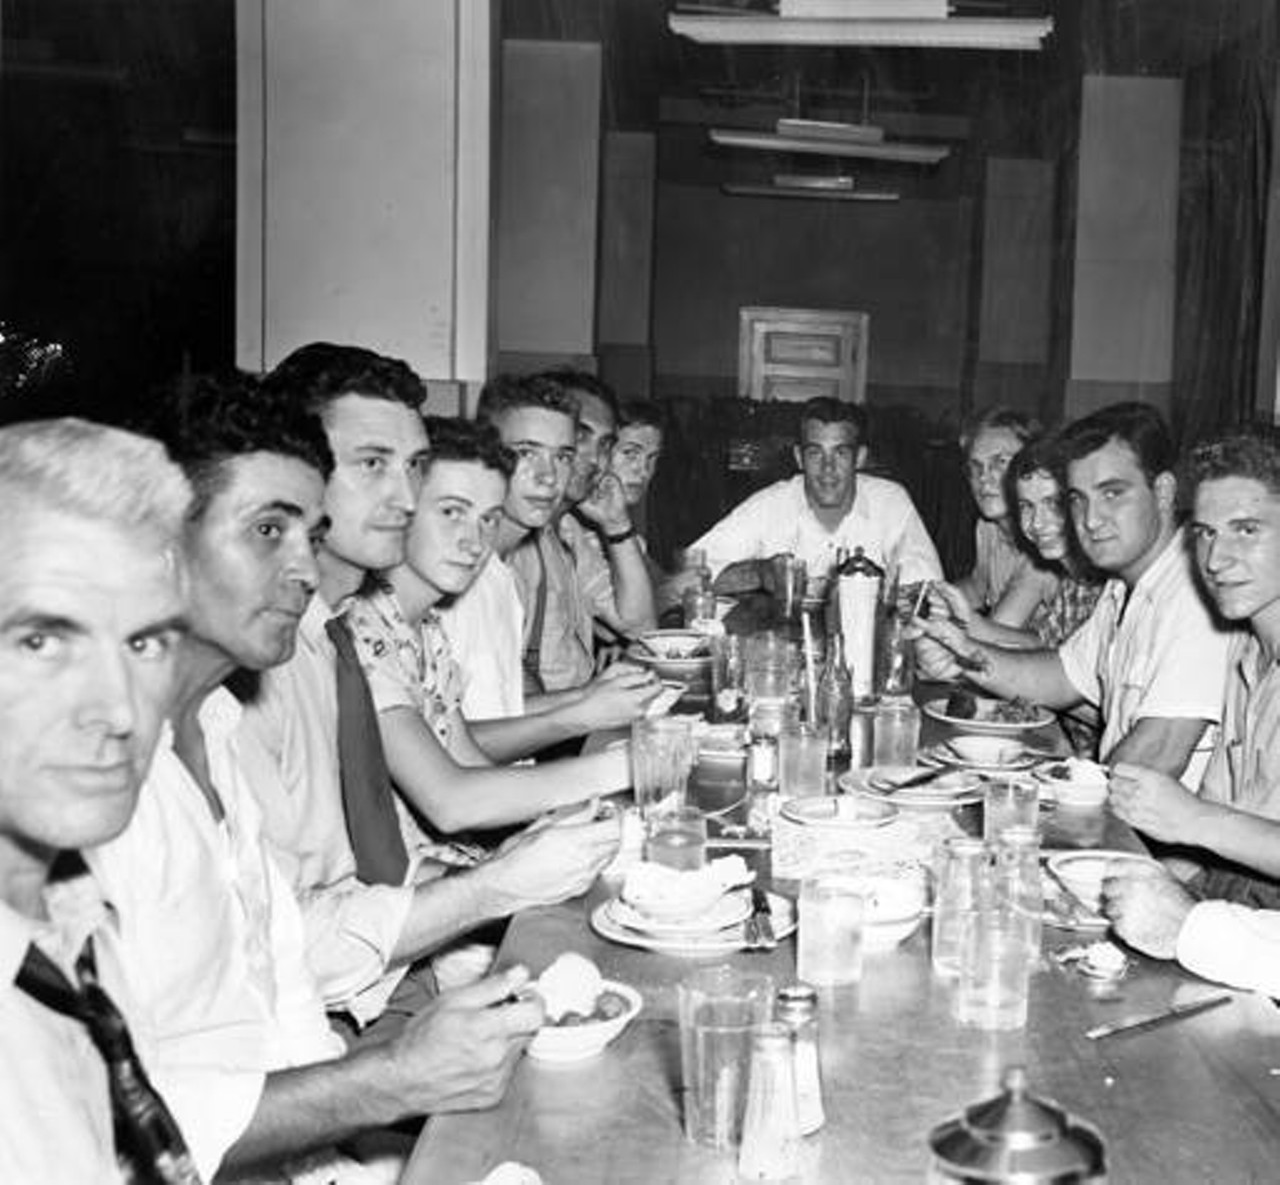 Dining with the Browns in 1947.